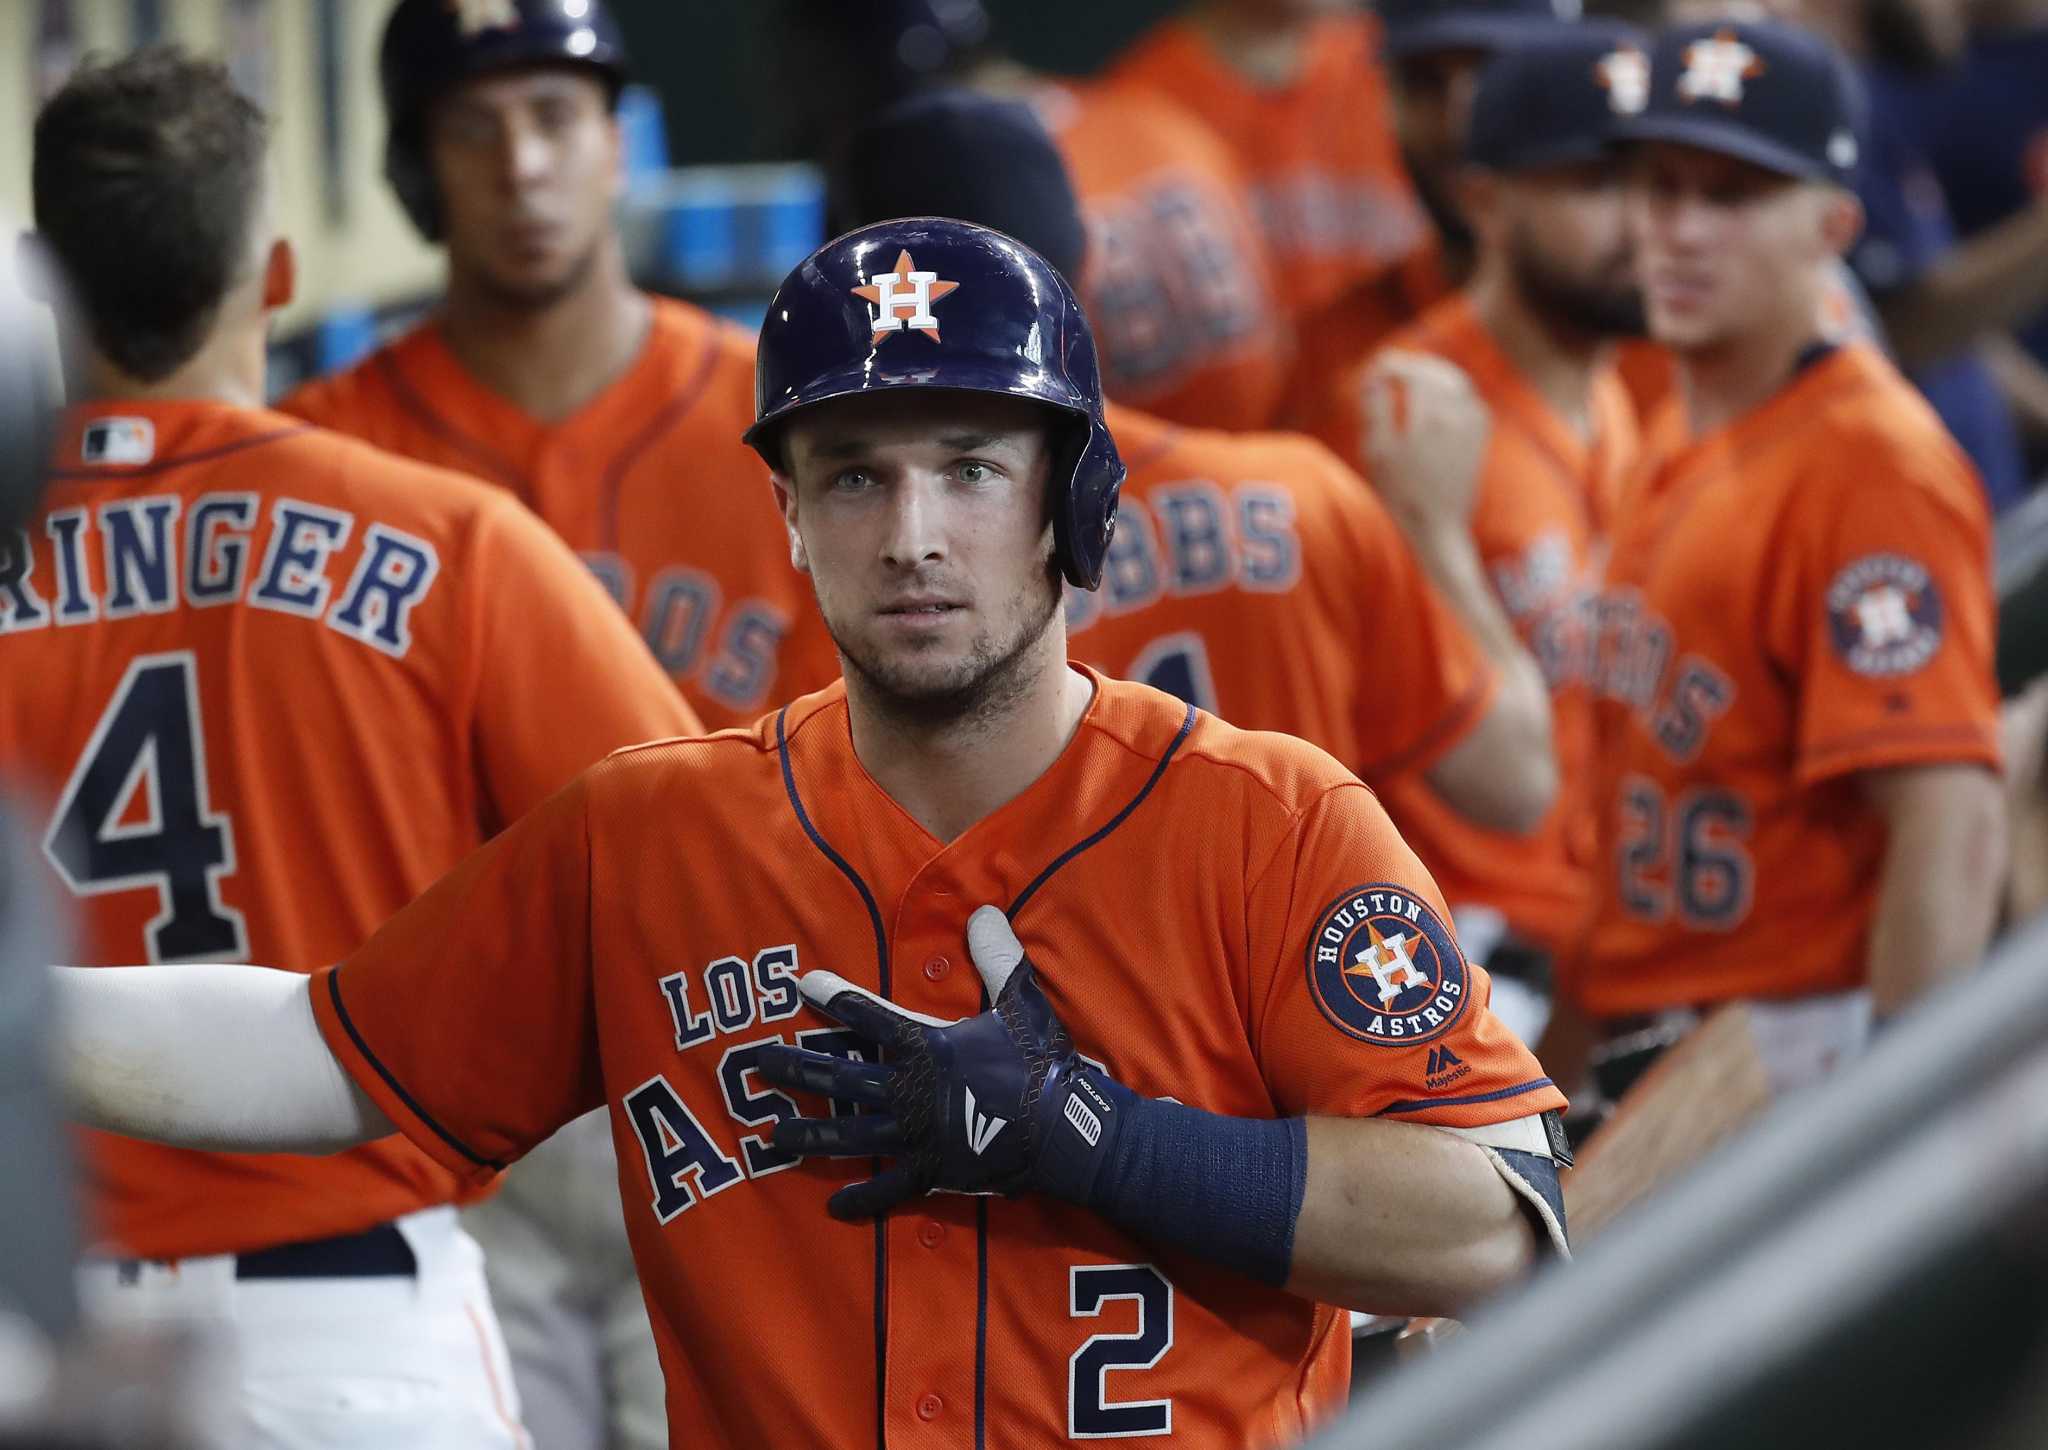 Alex Bregman Draws Real MVP Love as He Stares Down the A's: This